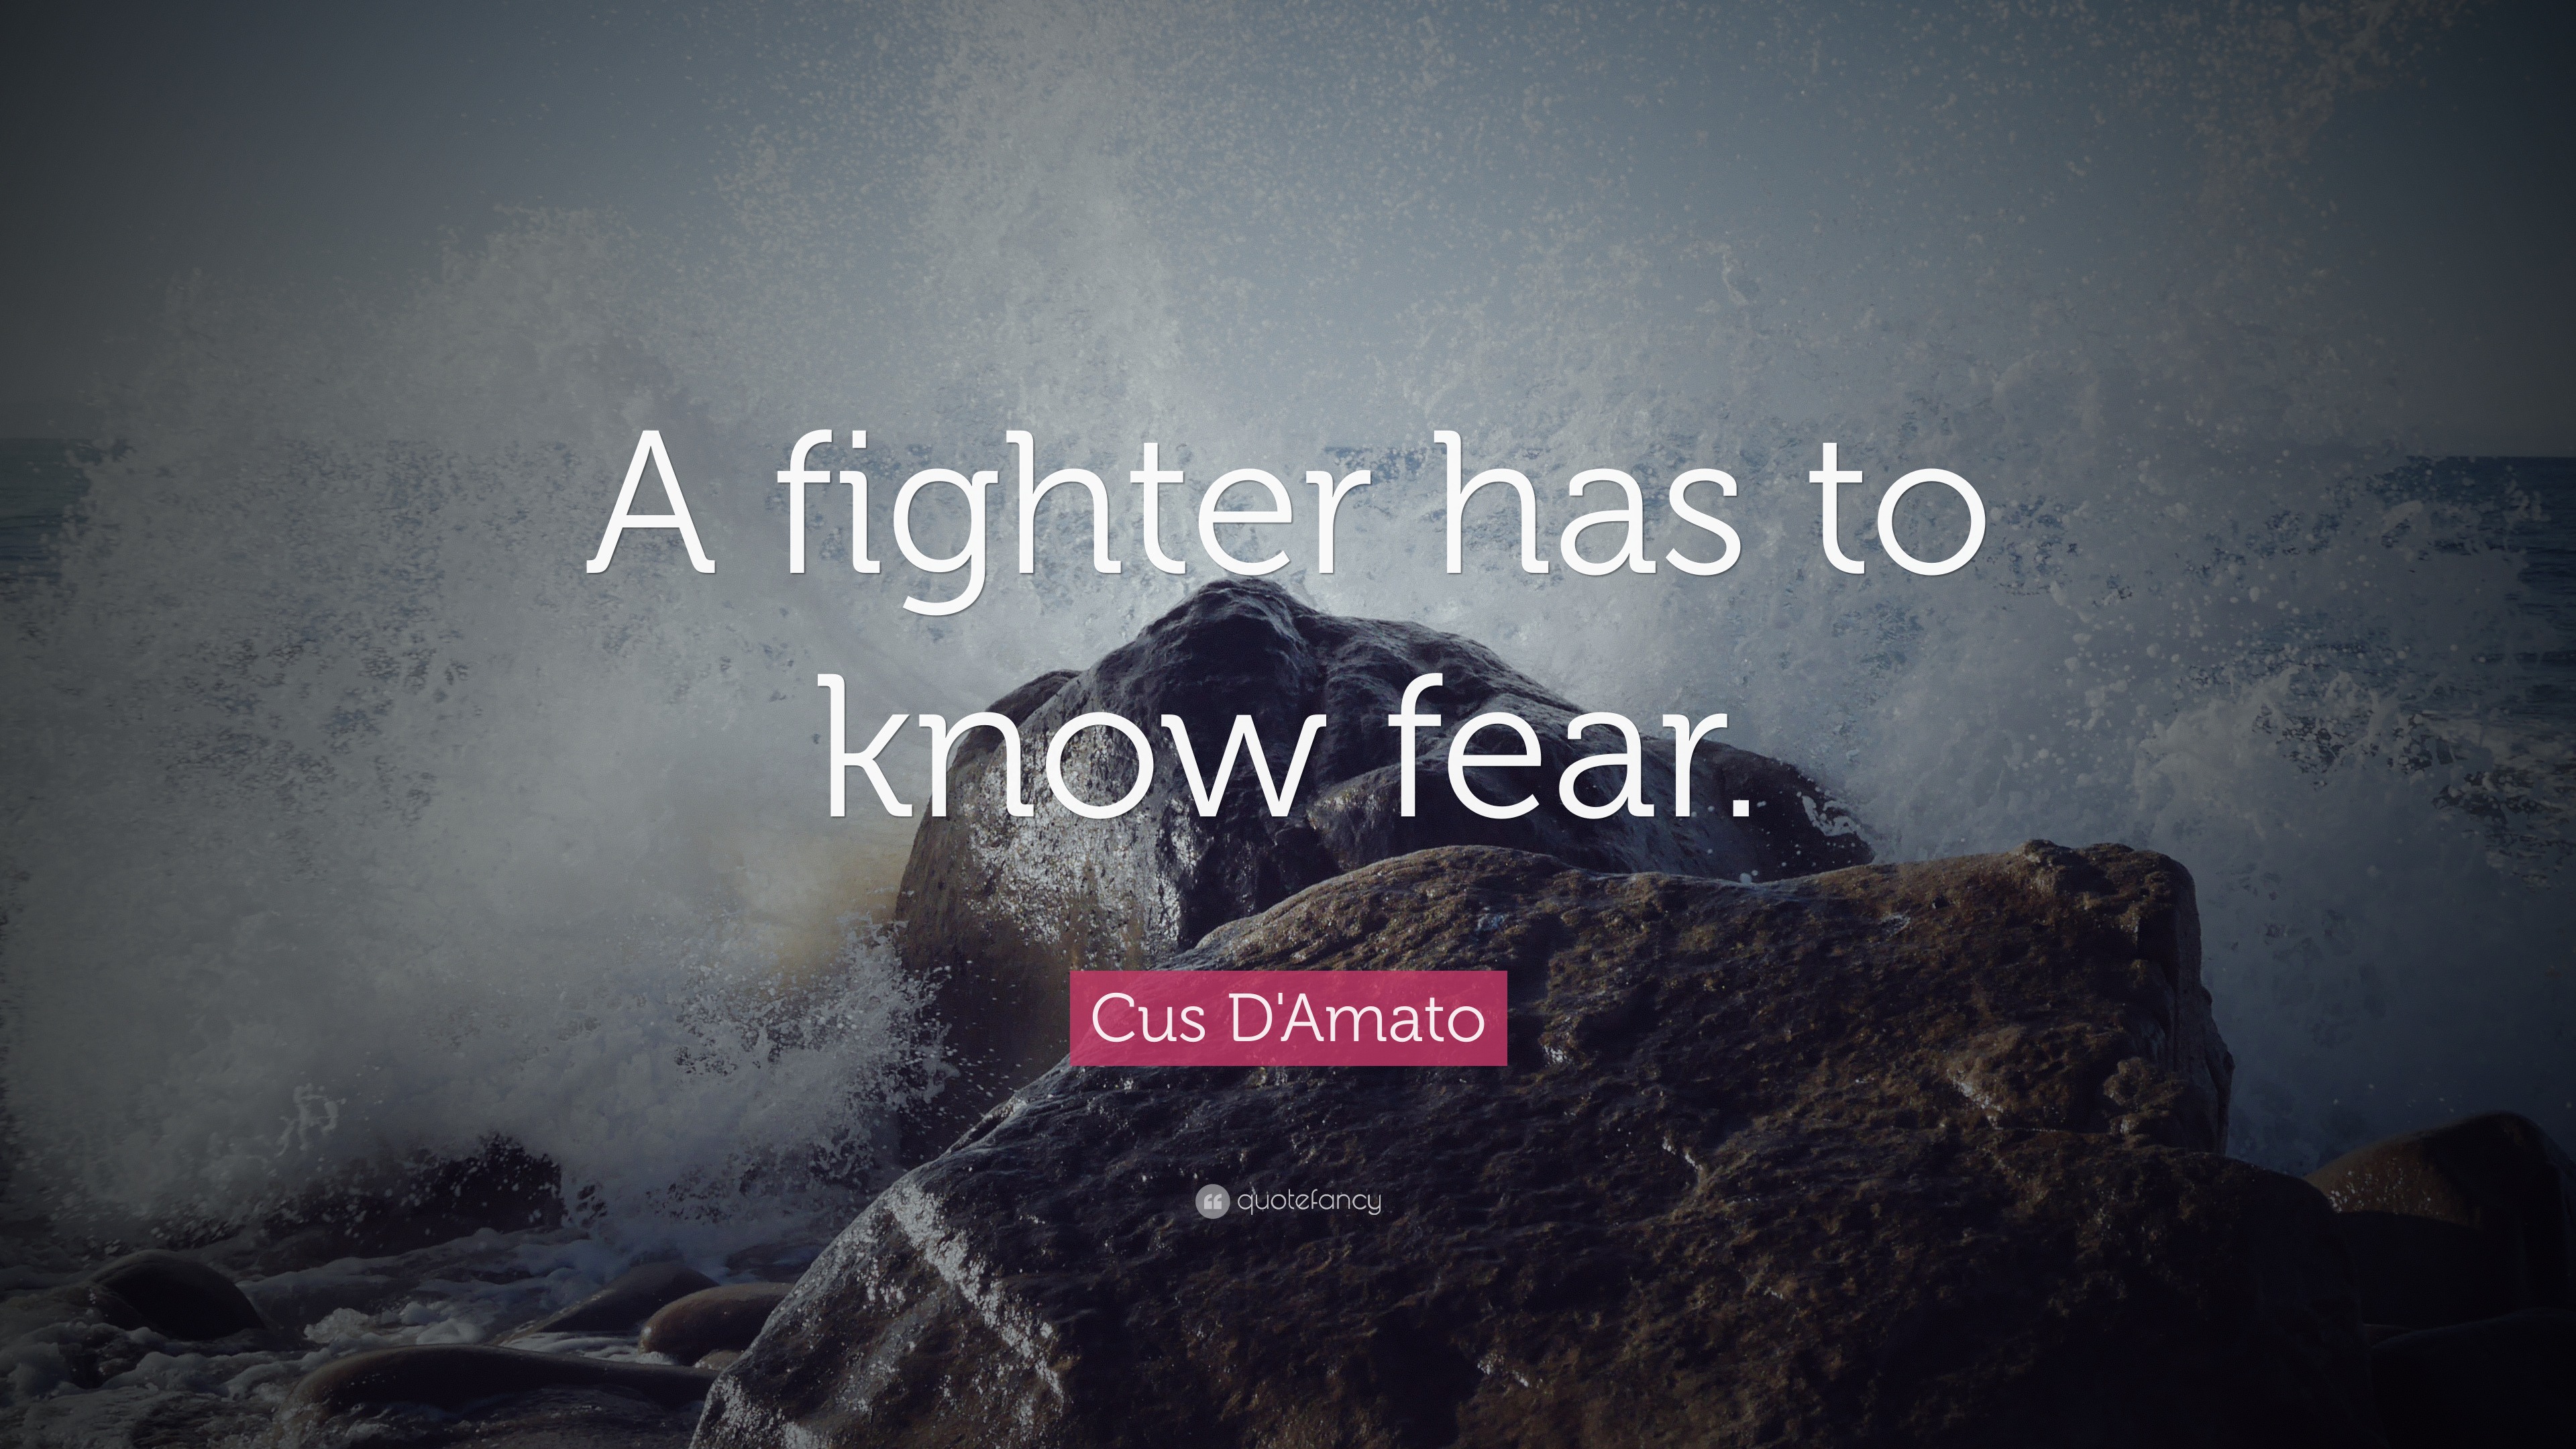 Cus D'Amato Quote: "A fighter has to know fear."